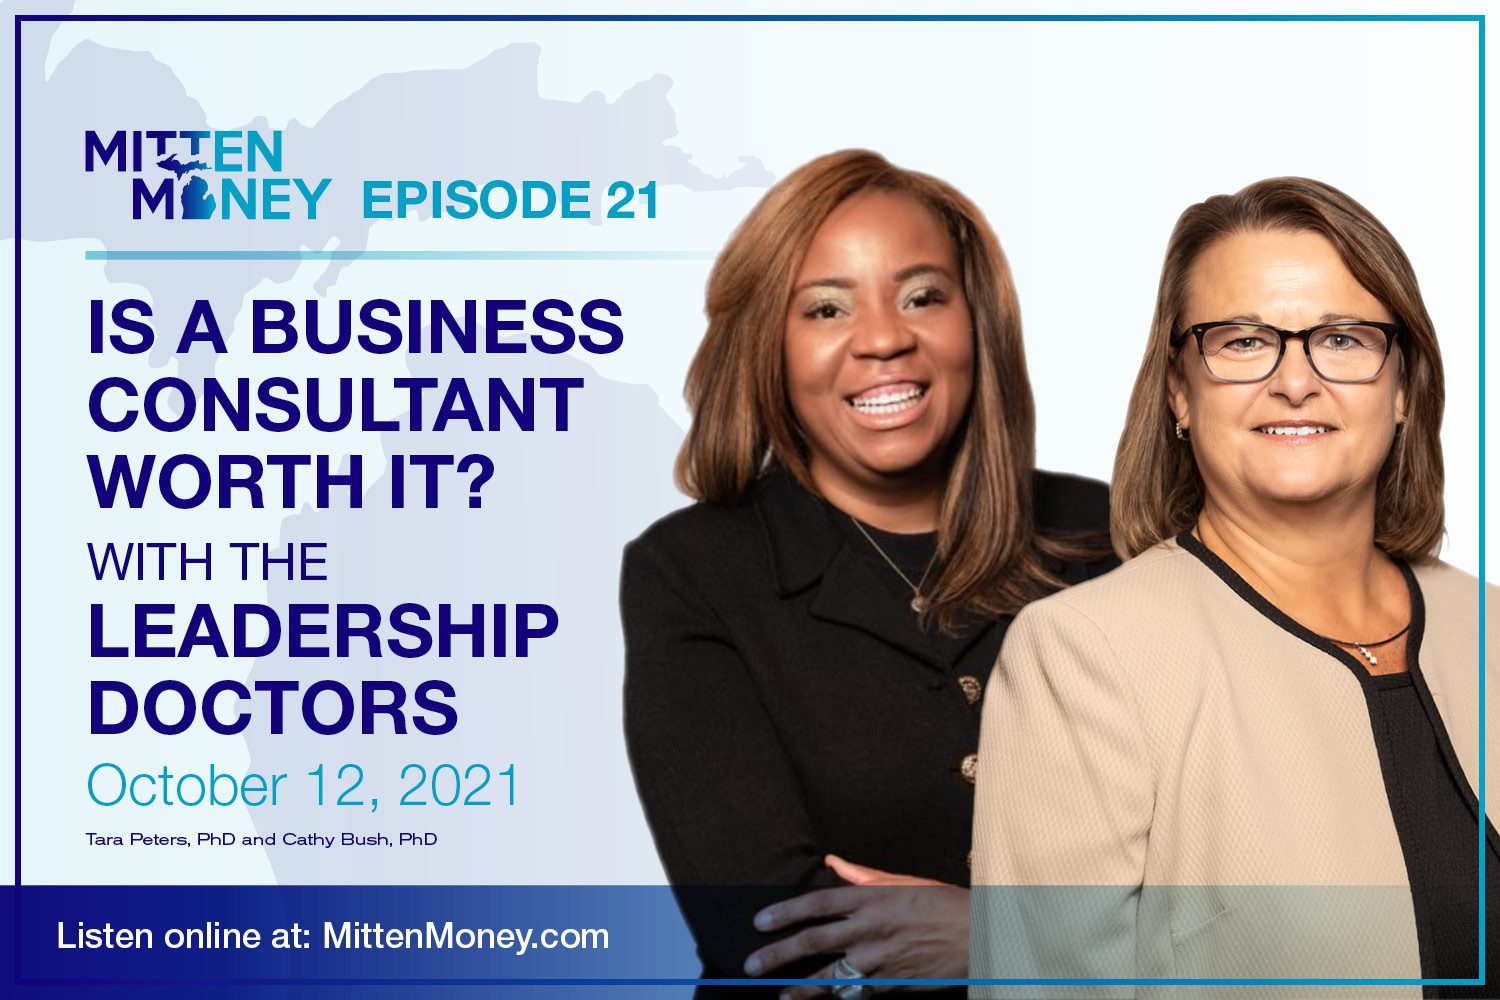 Dr. Tara Peters and Dr. Cathy Bush Mitten Money Episode 21 The Leadership Doctors